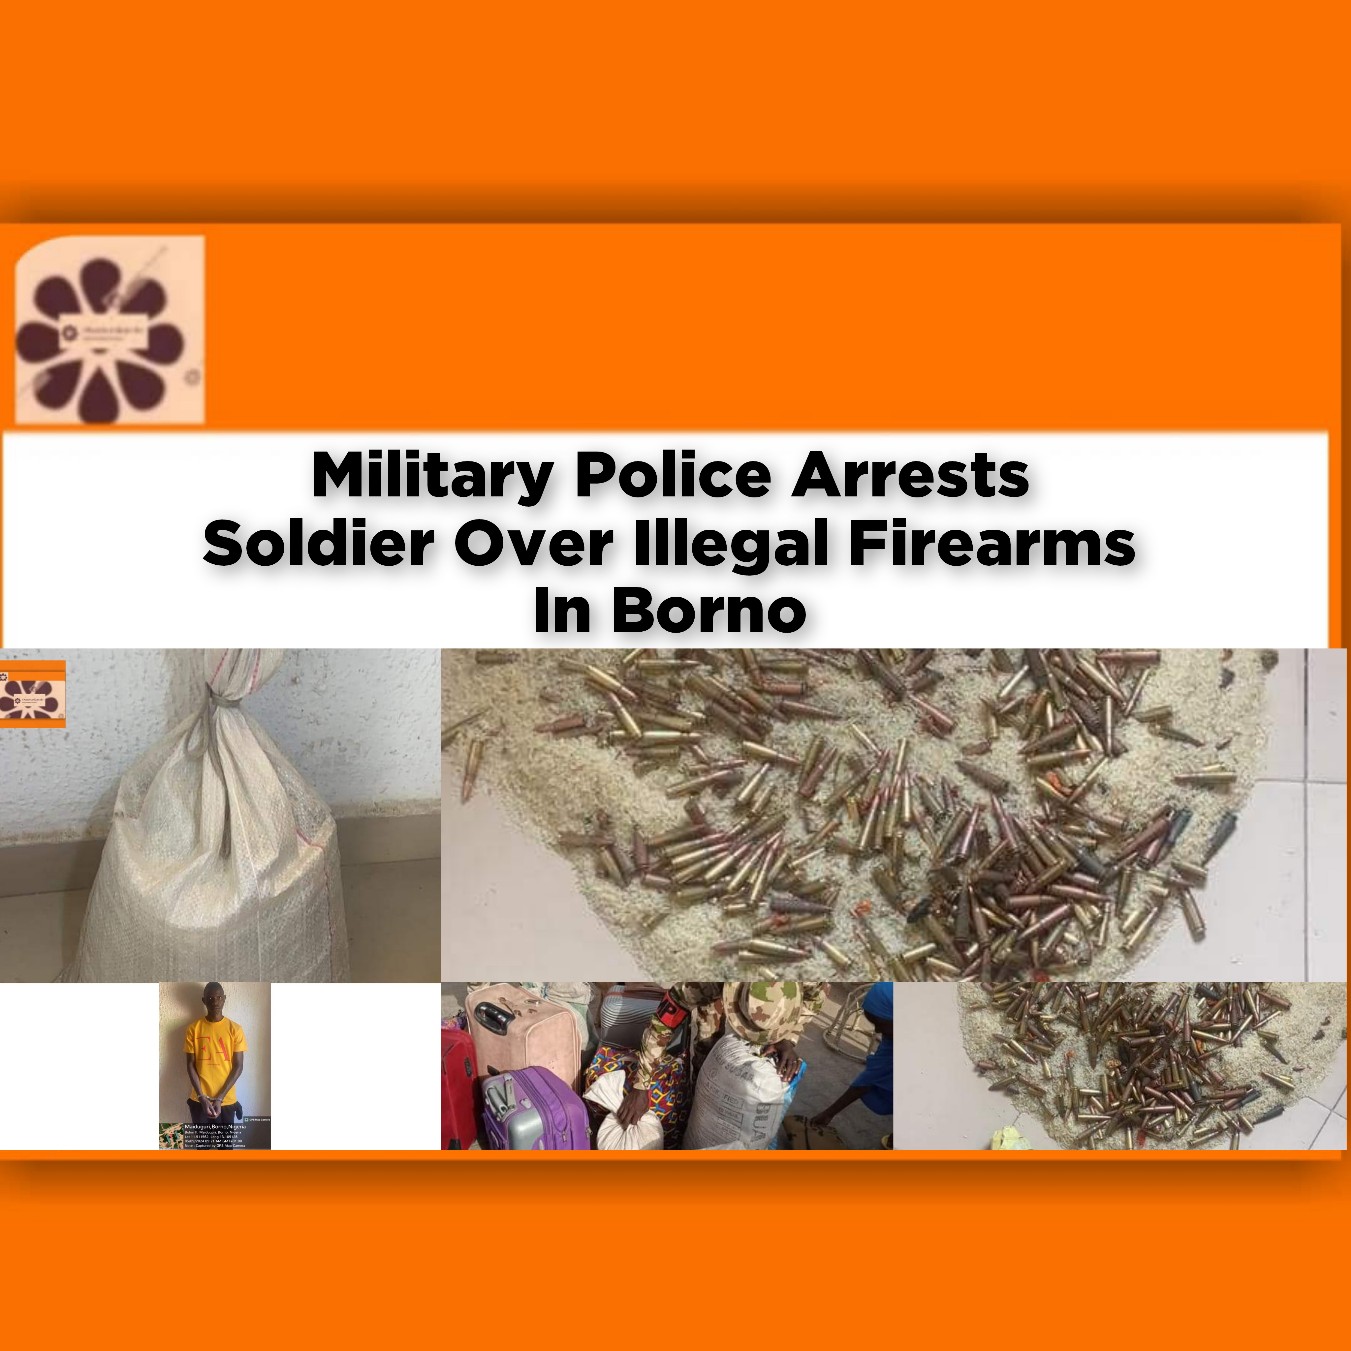 Military Police Arrests Soldier Over Illegal Firearms In Borno ~ OsazuwaAkonedo #Redesign